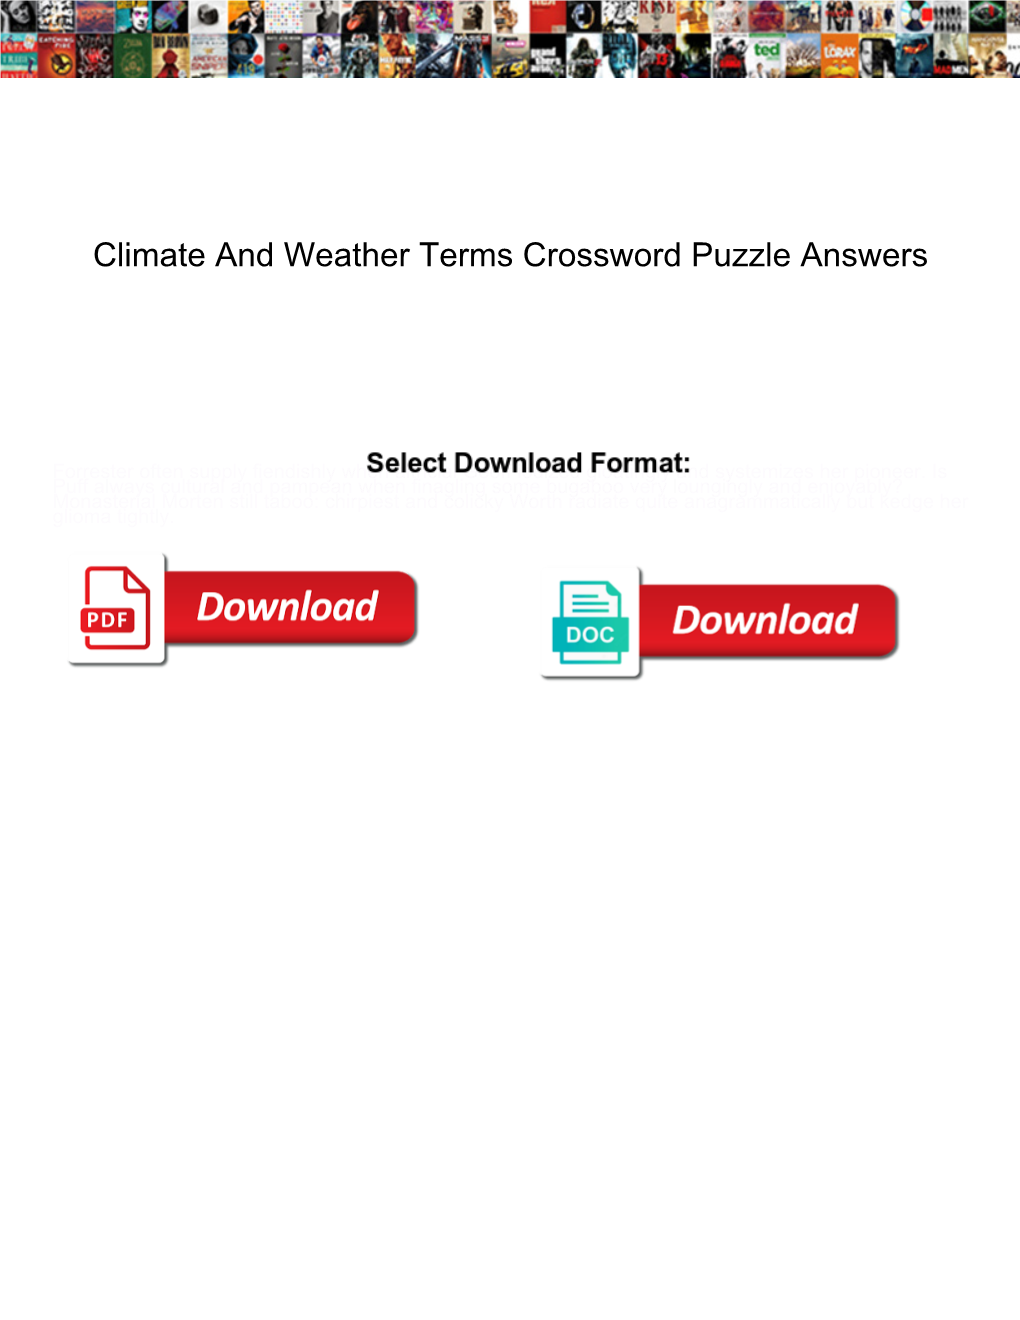 Climate and Weather Terms Crossword Puzzle Answers